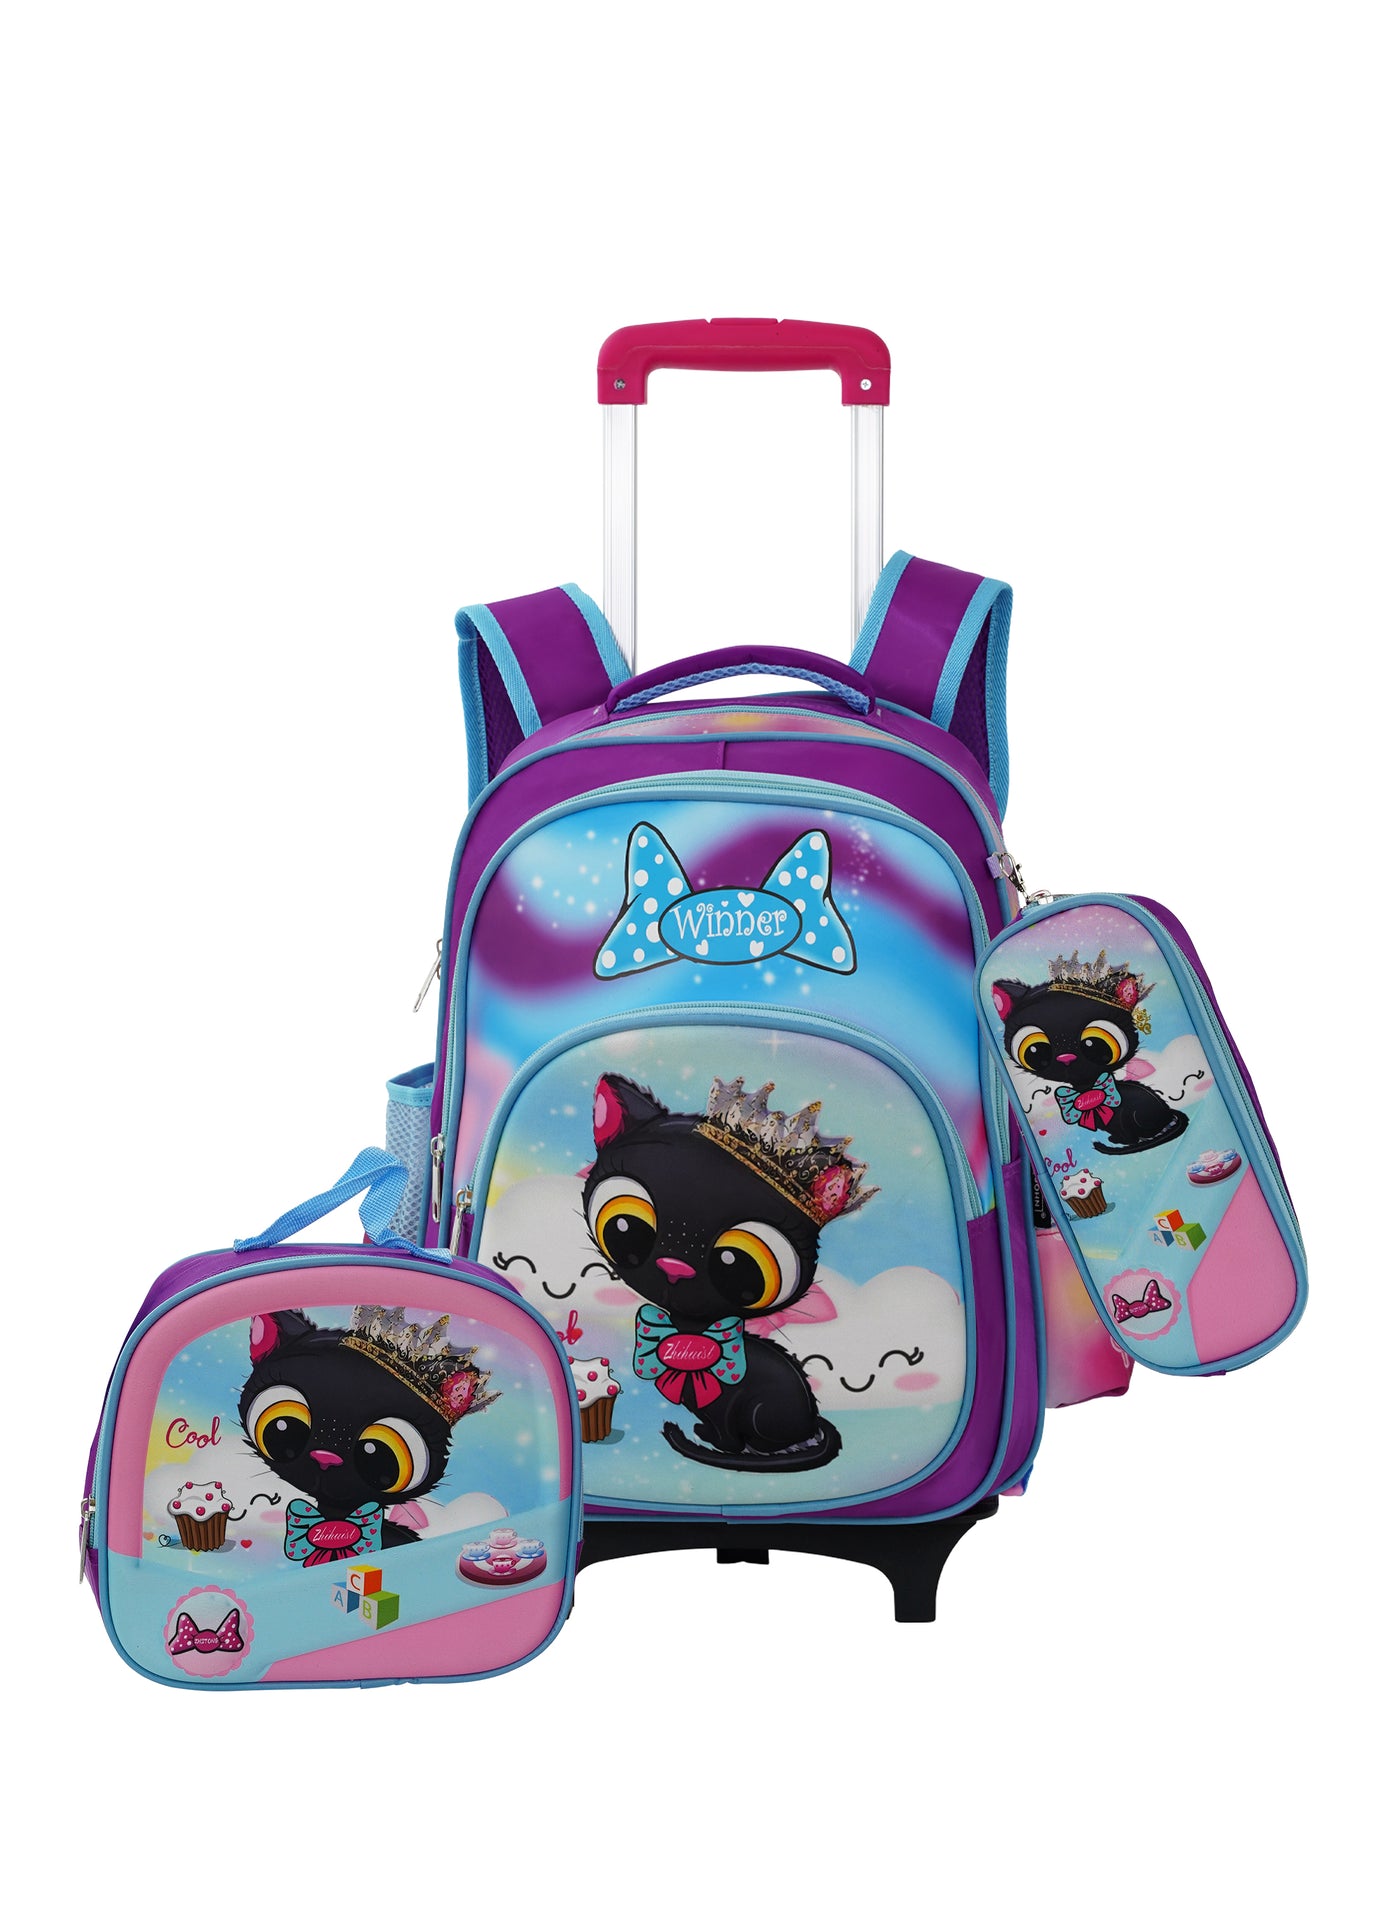 School Rolling backpack All in one Set of 3, school bag set with Pencil case,lunch bag for boys and girls, back to school essential, trolley bag for school